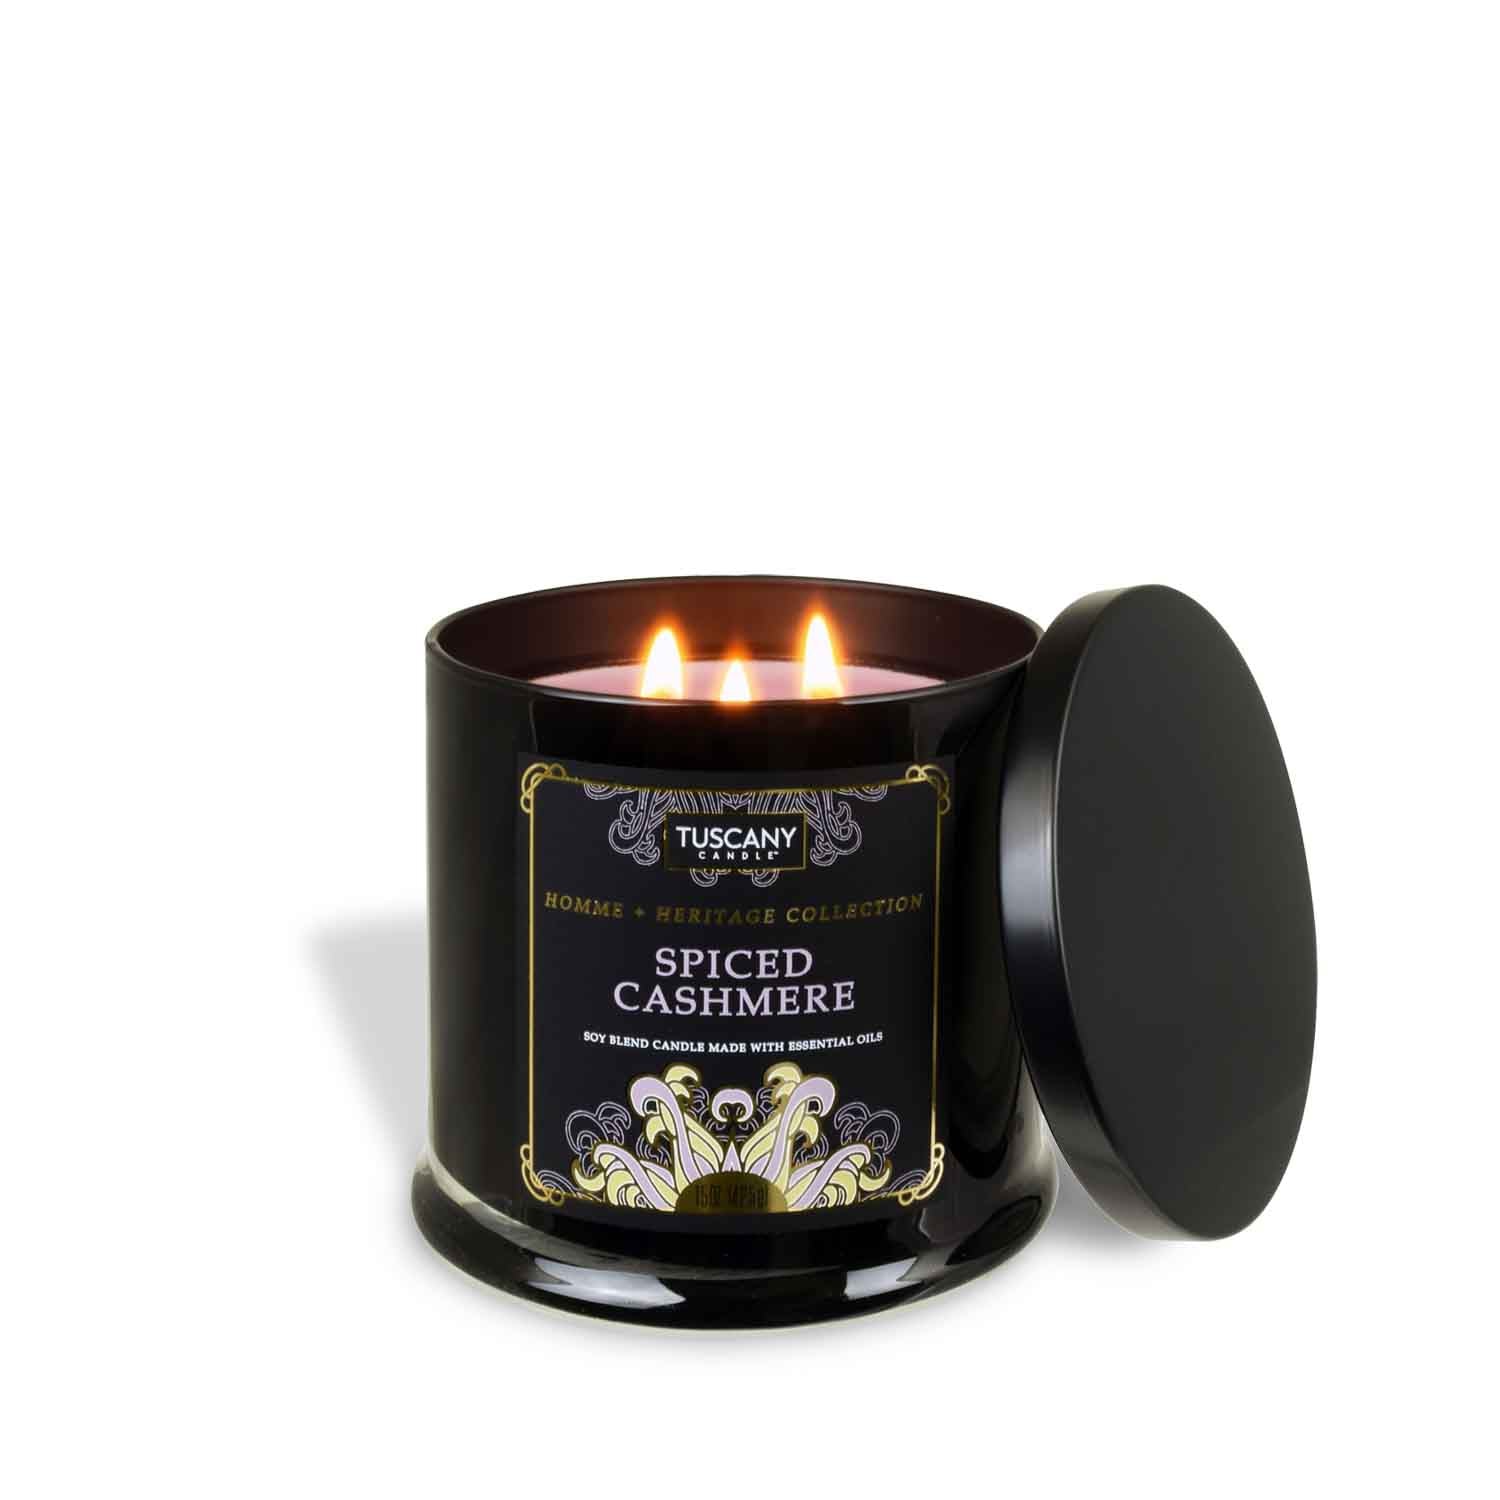 An elegant Spiced Cashmere Scented Jar Candle (15 oz) – Homme + Heritage Collection by Tuscany Candle in a black tin, exuding masculinity, set against a pristine white background.